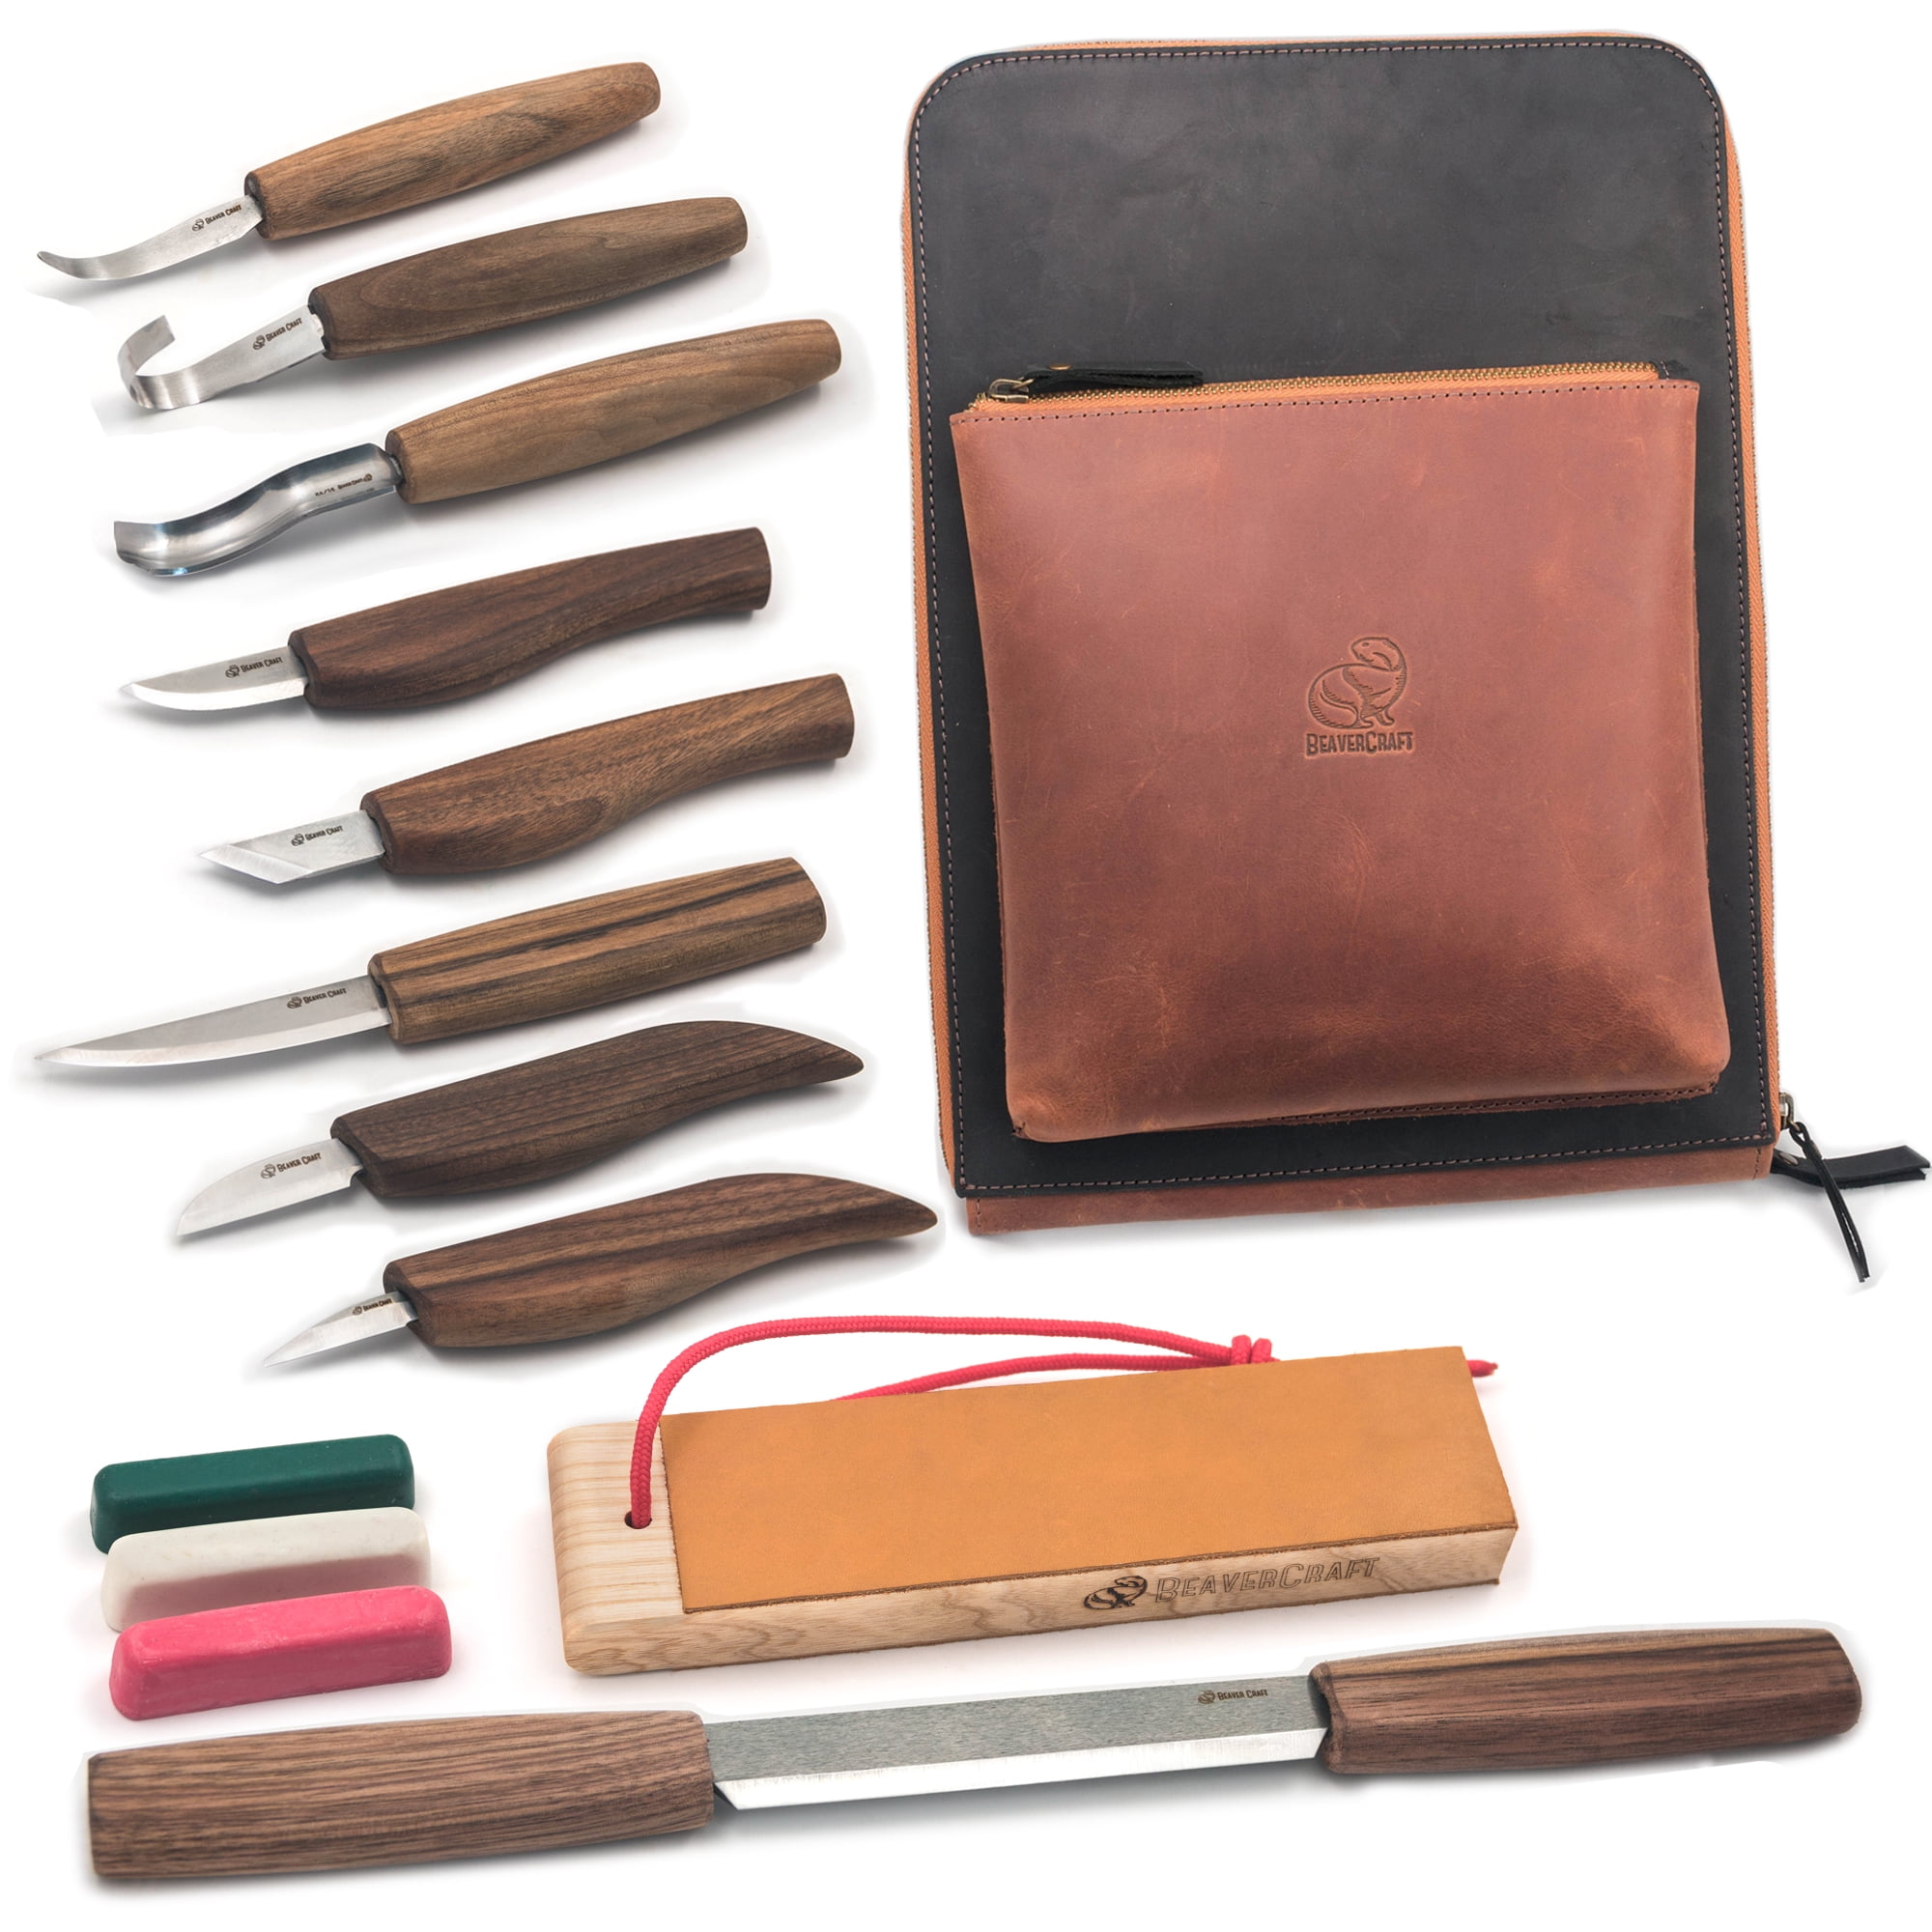 Beaver Craft Deluxe Carving Set